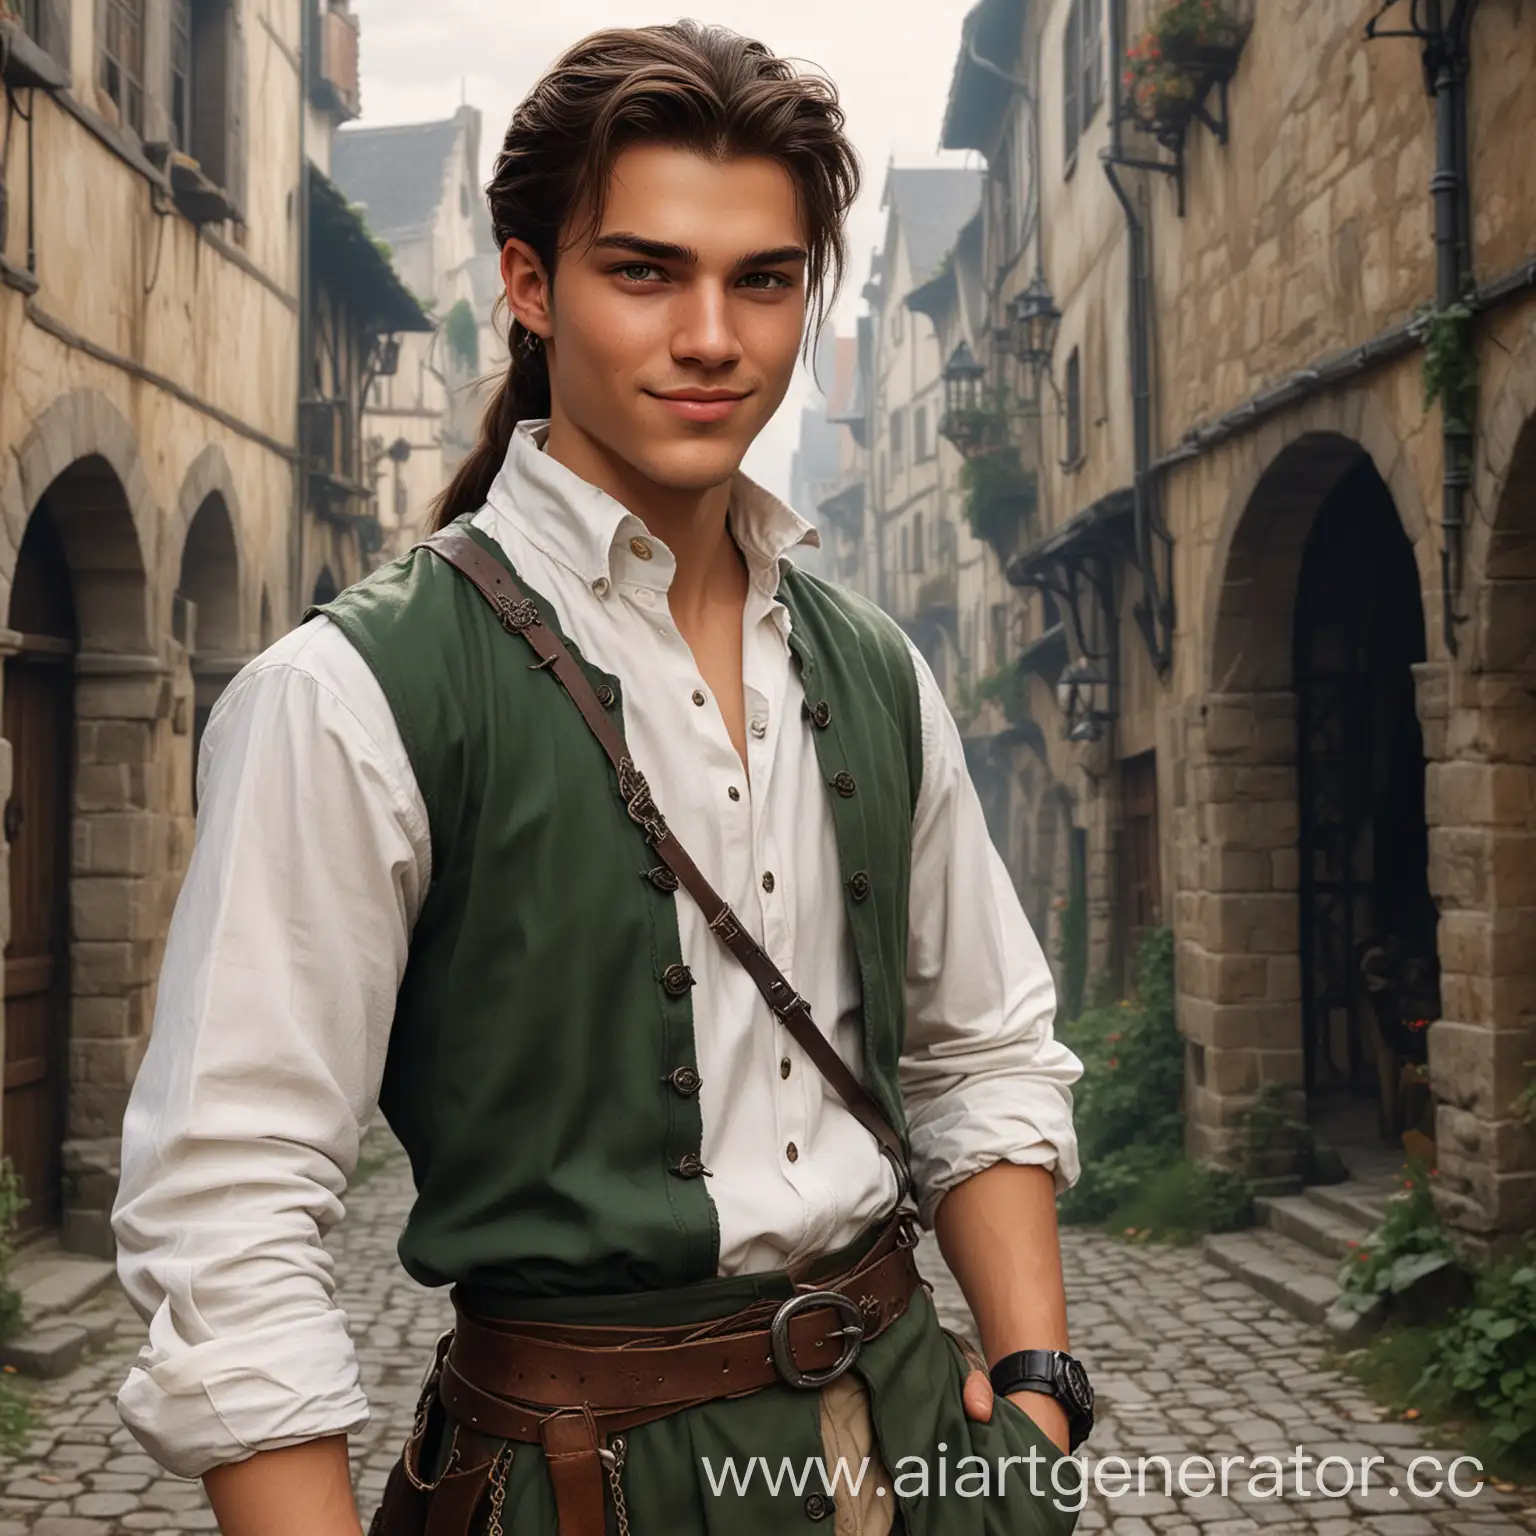 Medieval-Fantasy-DND-Character-Smirking-Teen-with-Dark-Hair-and-Watch